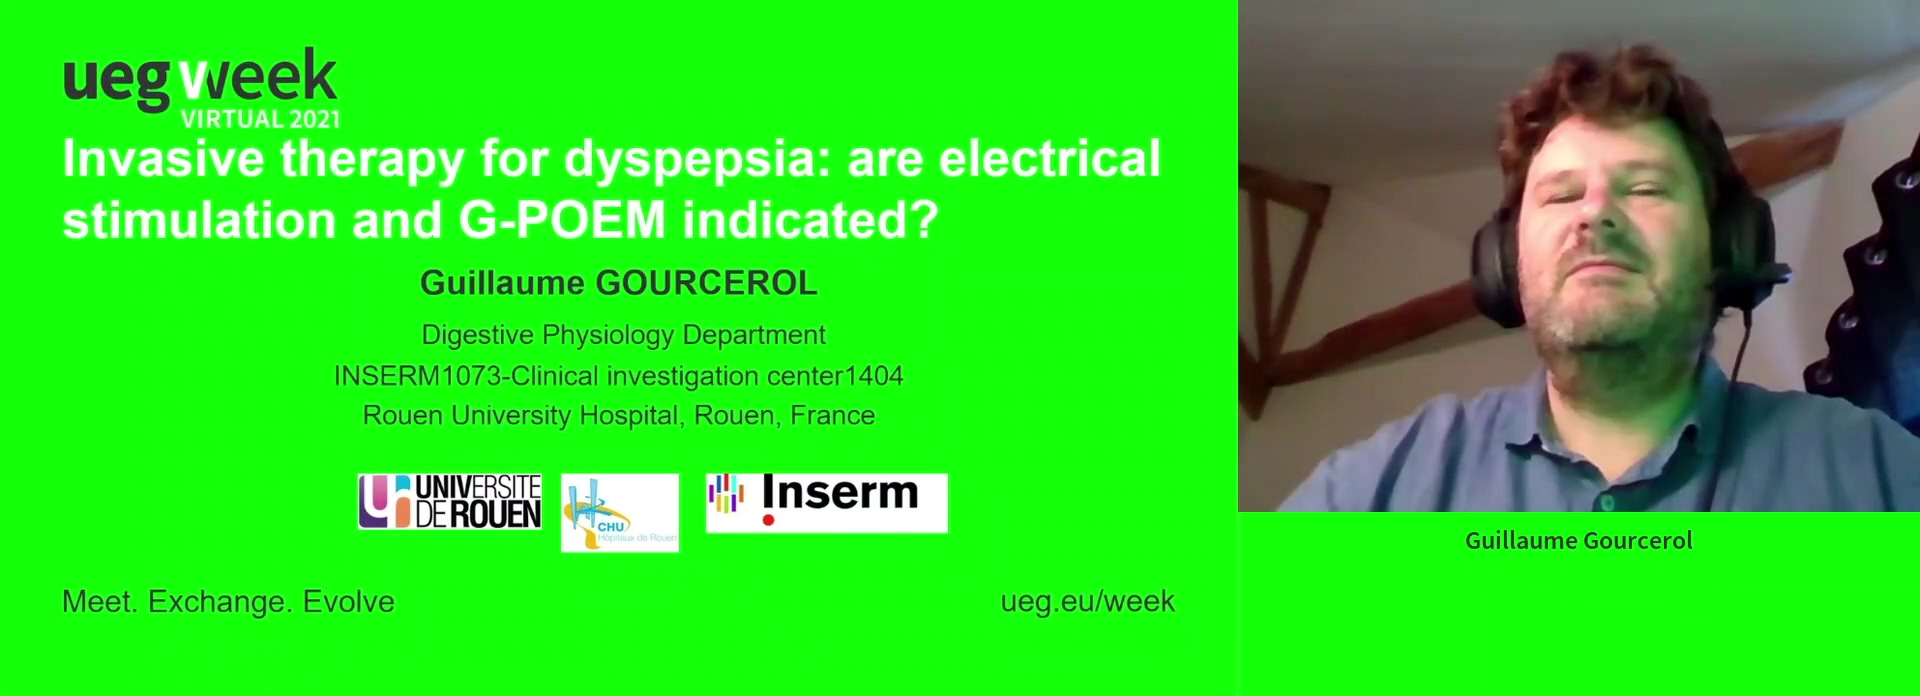 Invasive therapy for dyspepsia: Are electrical stimulation and G-POEM indicated?